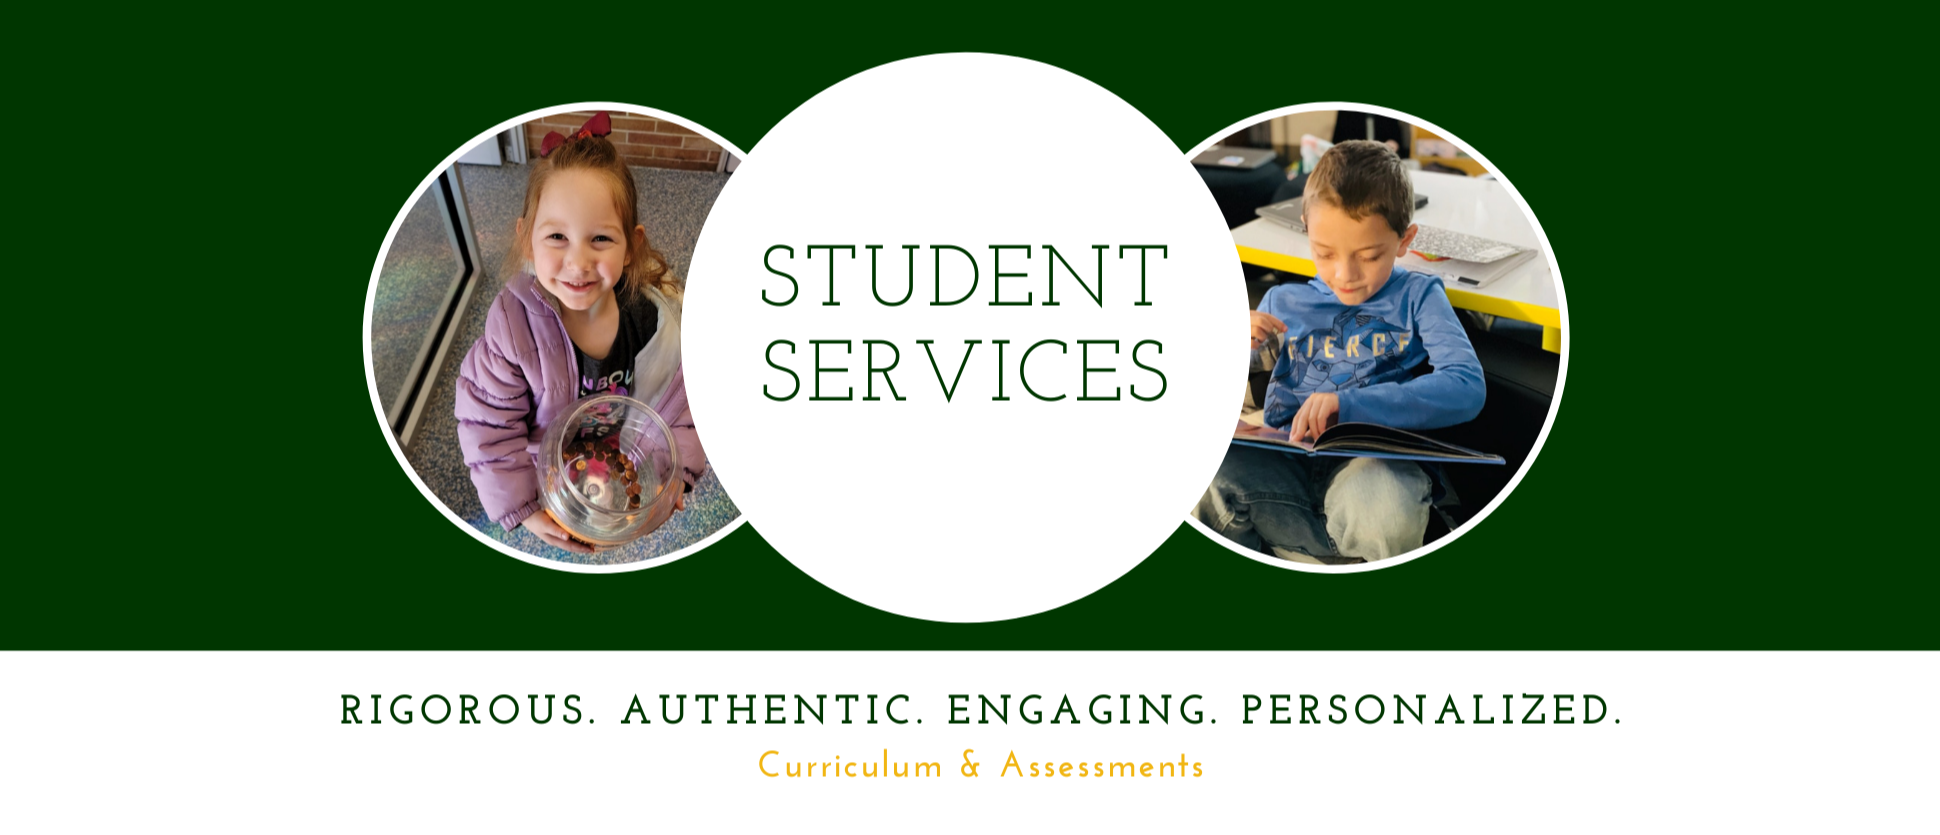 Student Services Curriculum and Assessments